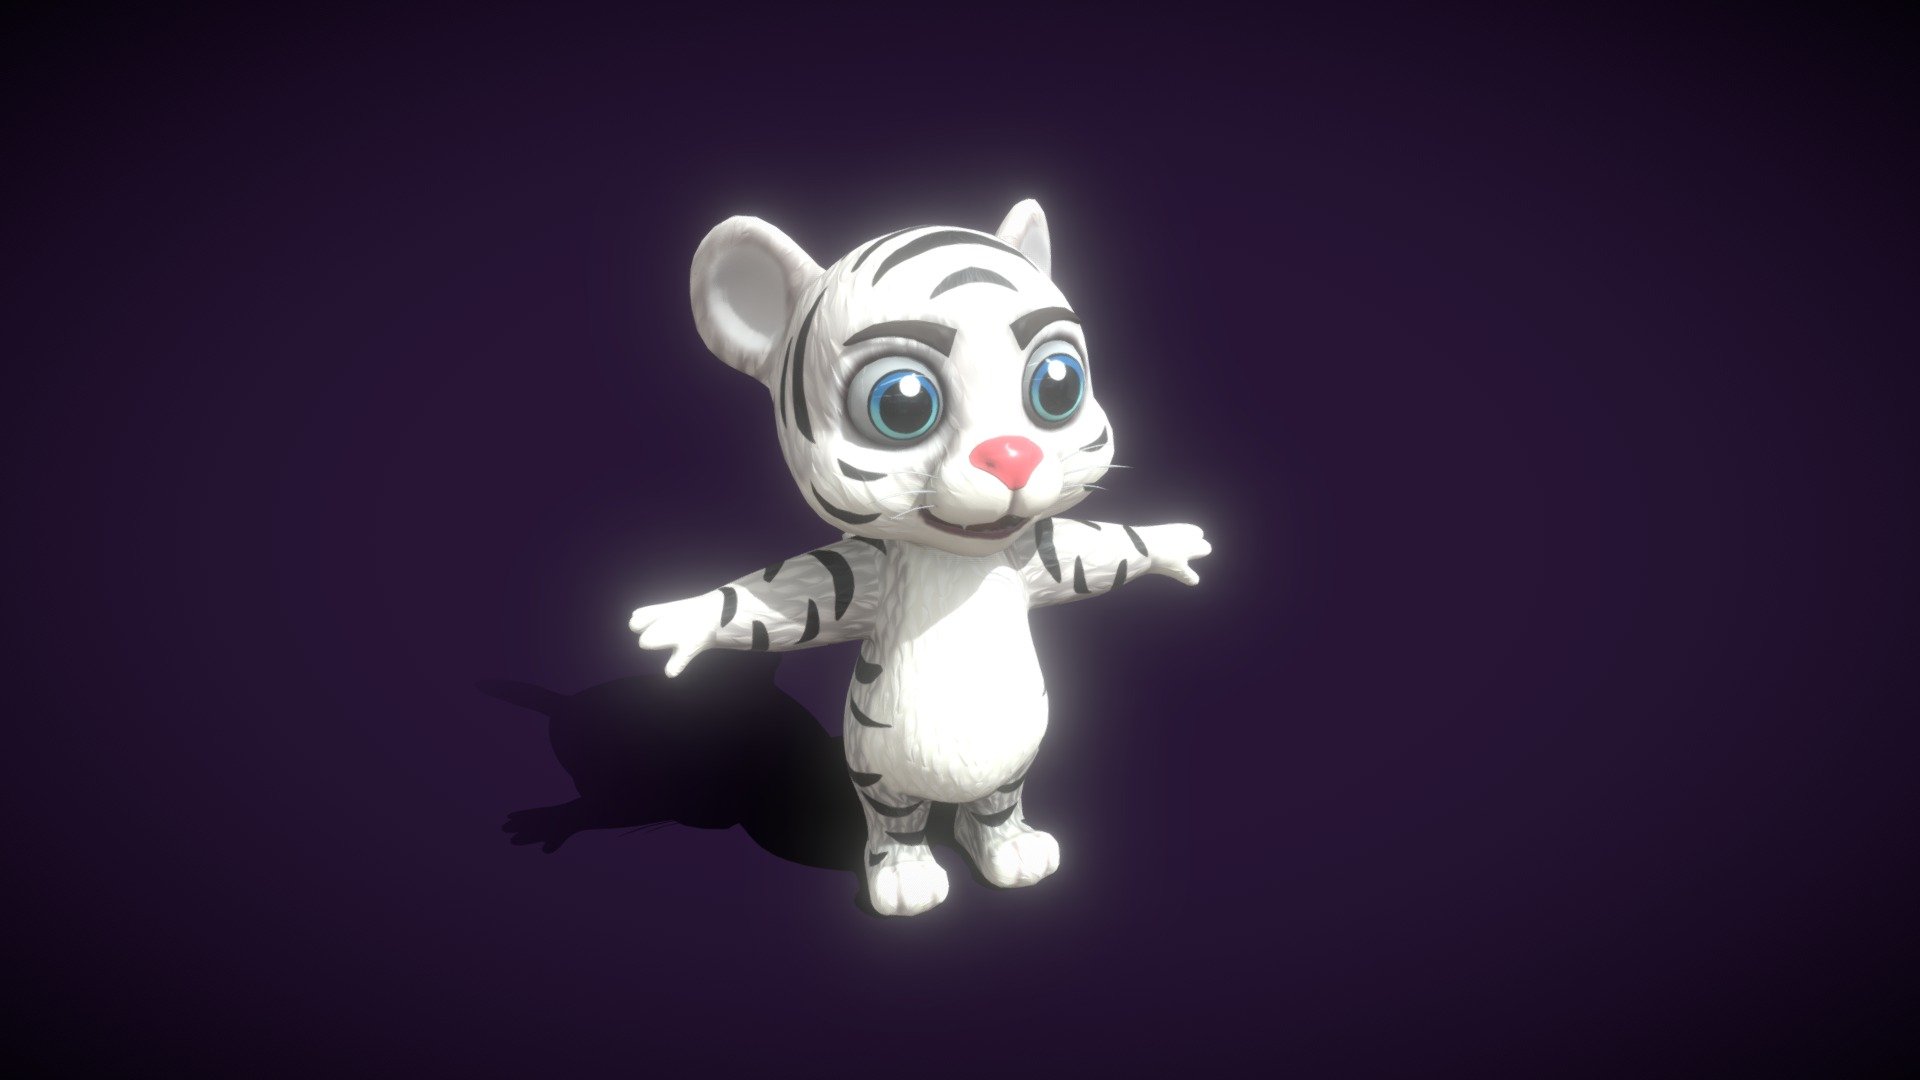 Cartoon White Tiger 3D Model is completely ready to be used in your games, animations, films, designs etc.  

All textures and materials are included and mapped in every format. The model is completely ready for use visualization in any 3d software and engine.  

Technical details:  




File formats included in the package are: FBX, OBJ, GLB, ABC, DAE, PLY, STL, BLEND, gLTF (generated), USDZ (generated)

Native software file format: BLEND

Render engine: Eevee

Polygons: 6,120

Vertices: 5,789

Textures: Color, Metallic, Roughness, Normal, AO

All textures are 2k resolution.
 - Cartoon White Tiger 3D Model - Buy Royalty Free 3D model by 3DDisco 3d model